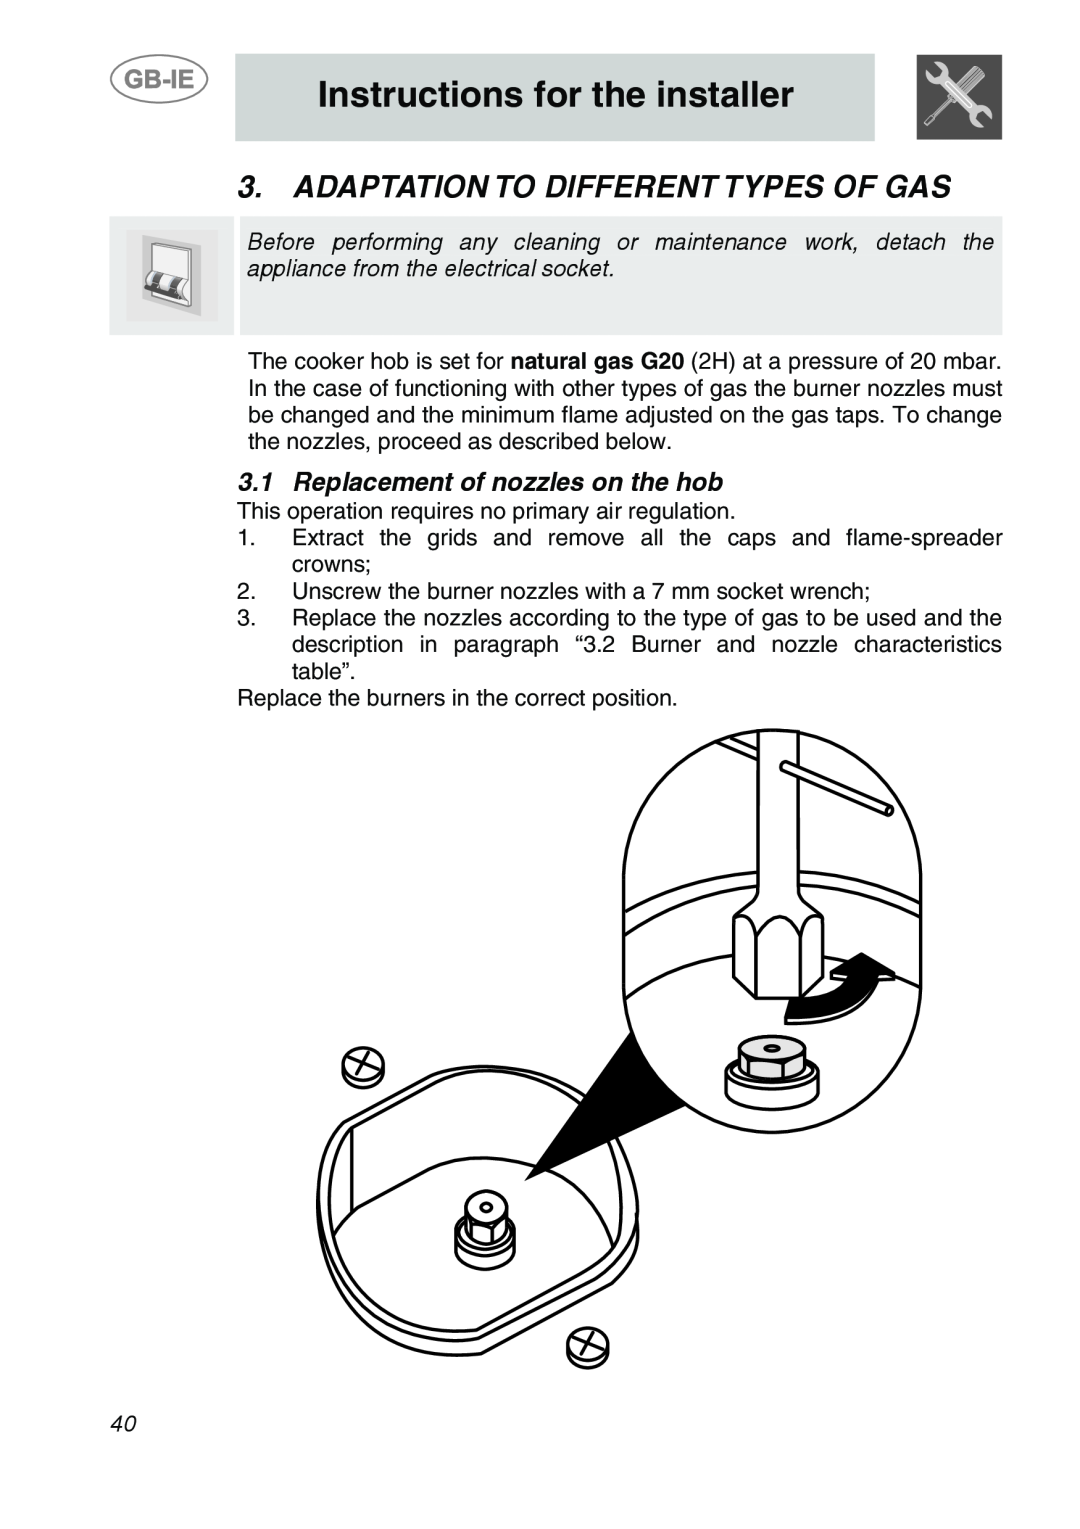 Smeg A1-6 manual Adaptation To Different Types Of Gas, Replacement of nozzles on the hob, Instructions for the installer 